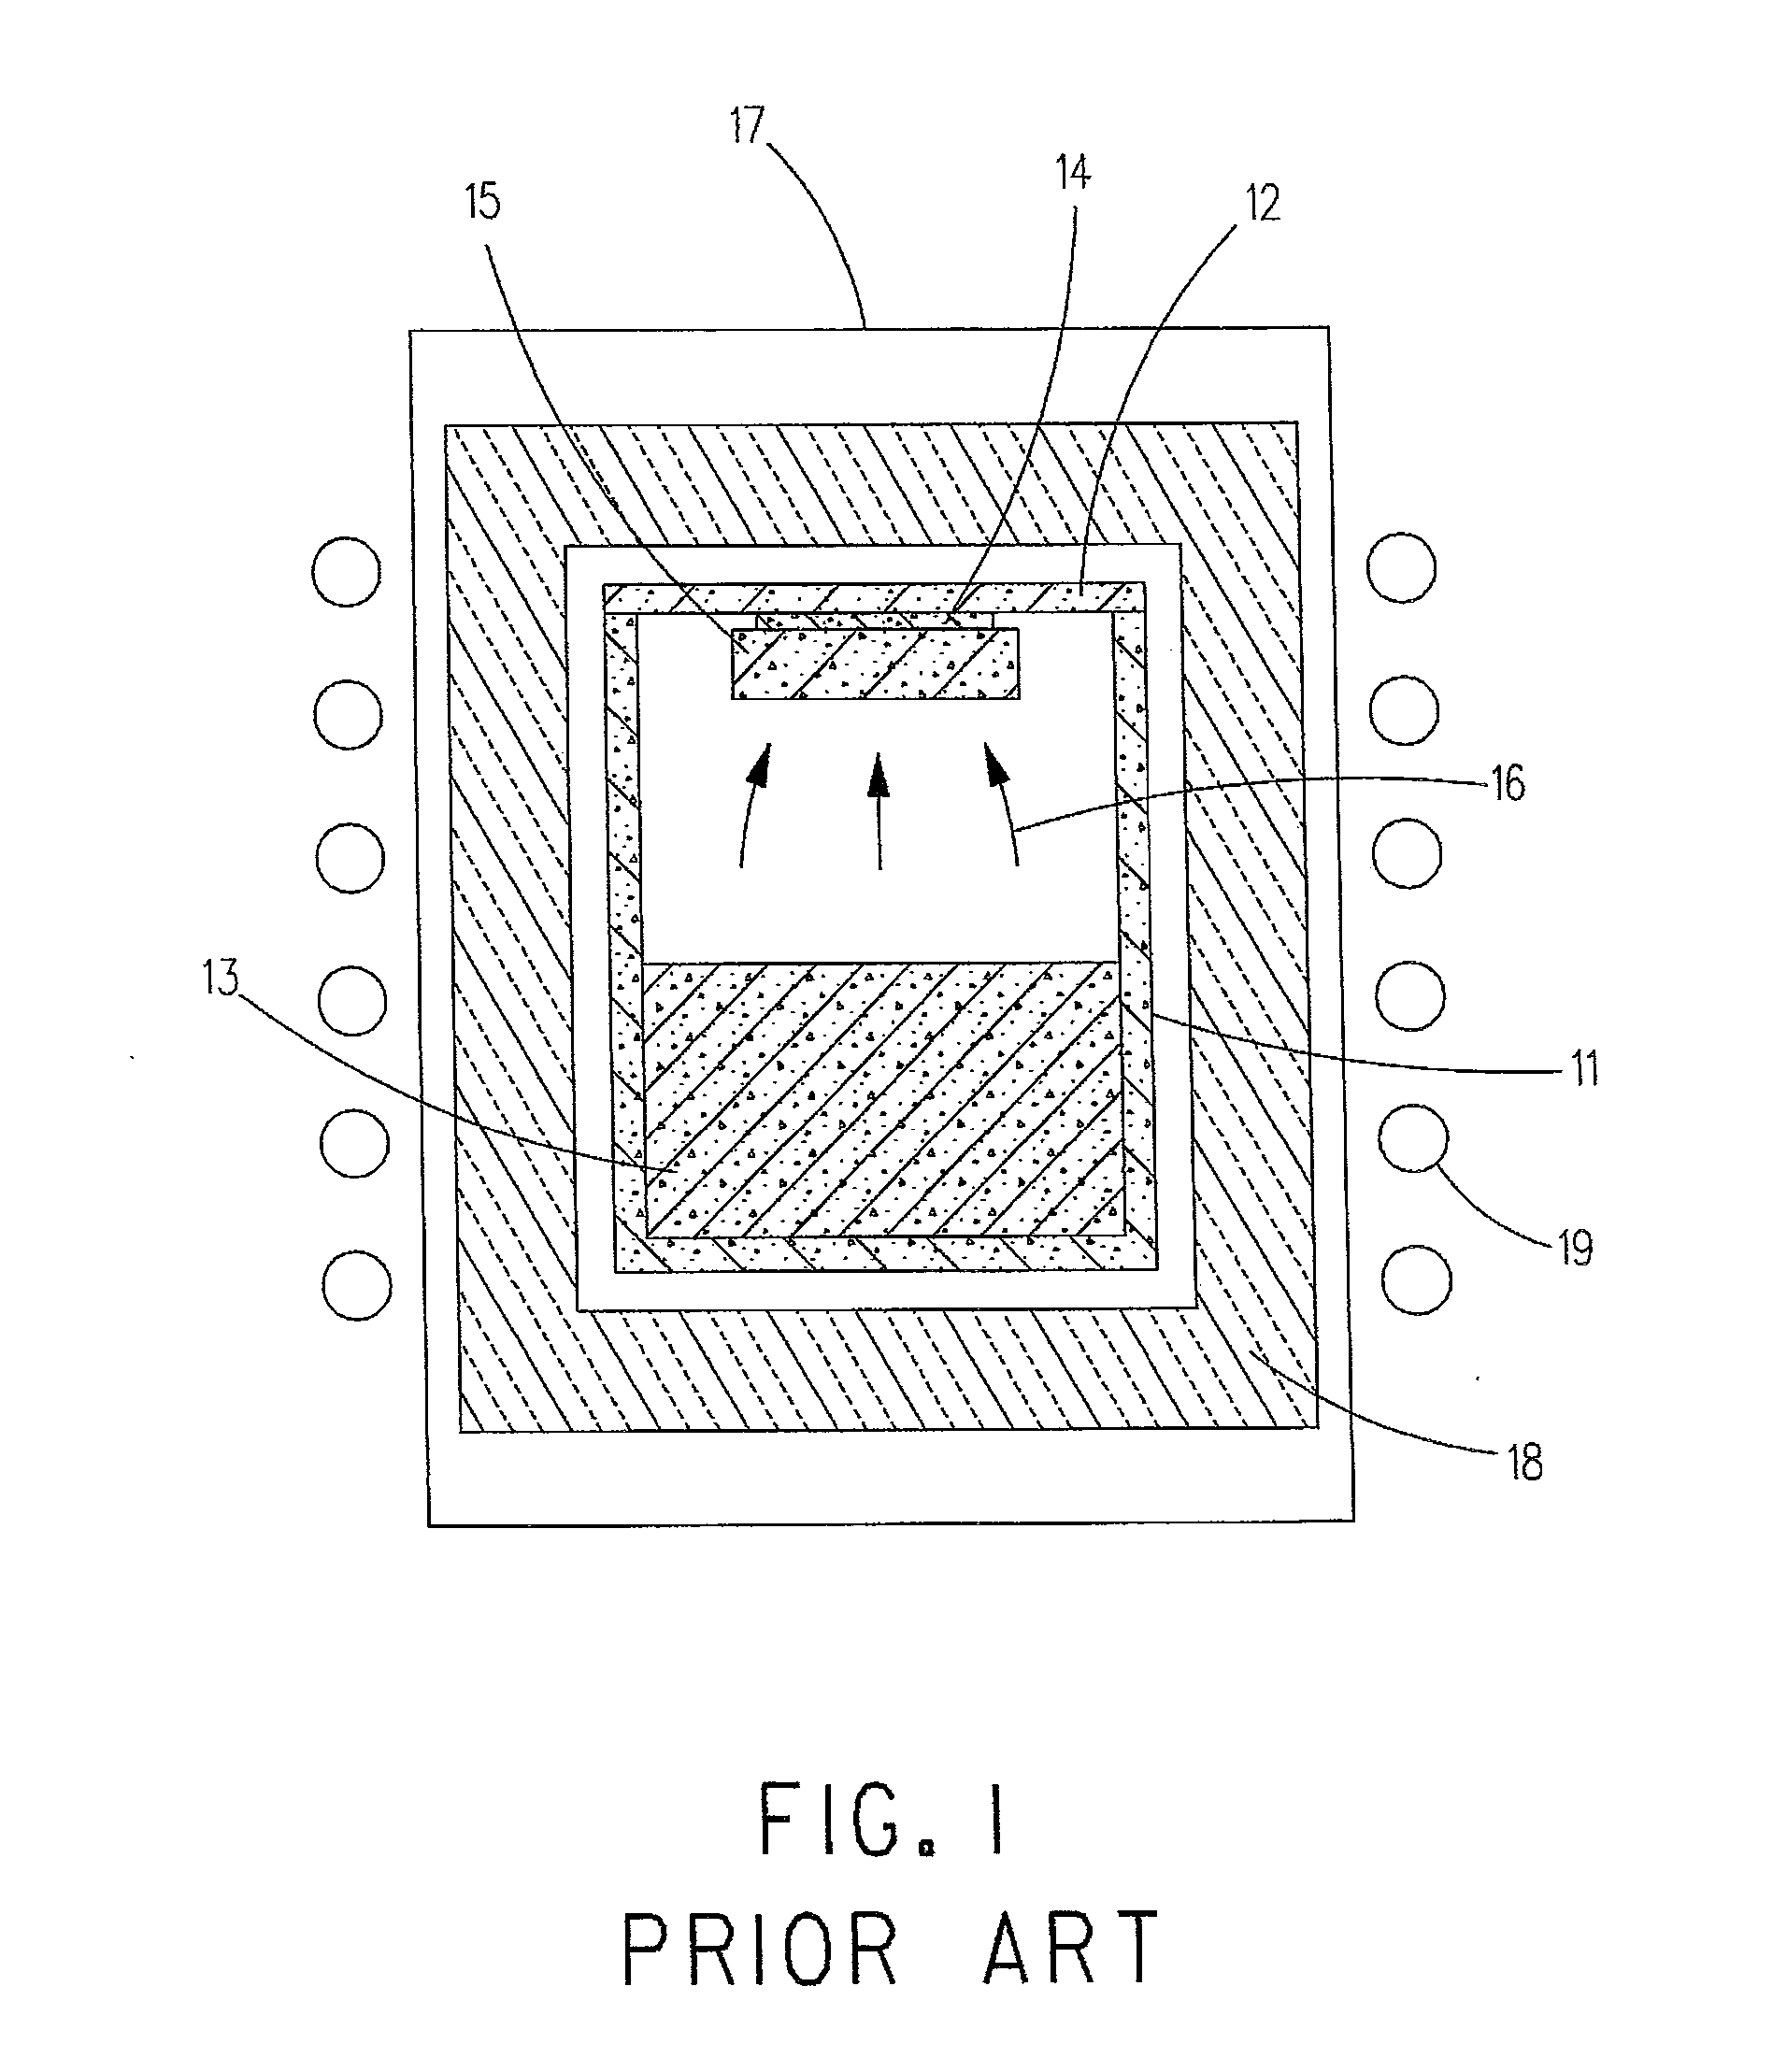 Sic single crystal sublimation growth method and apparatus